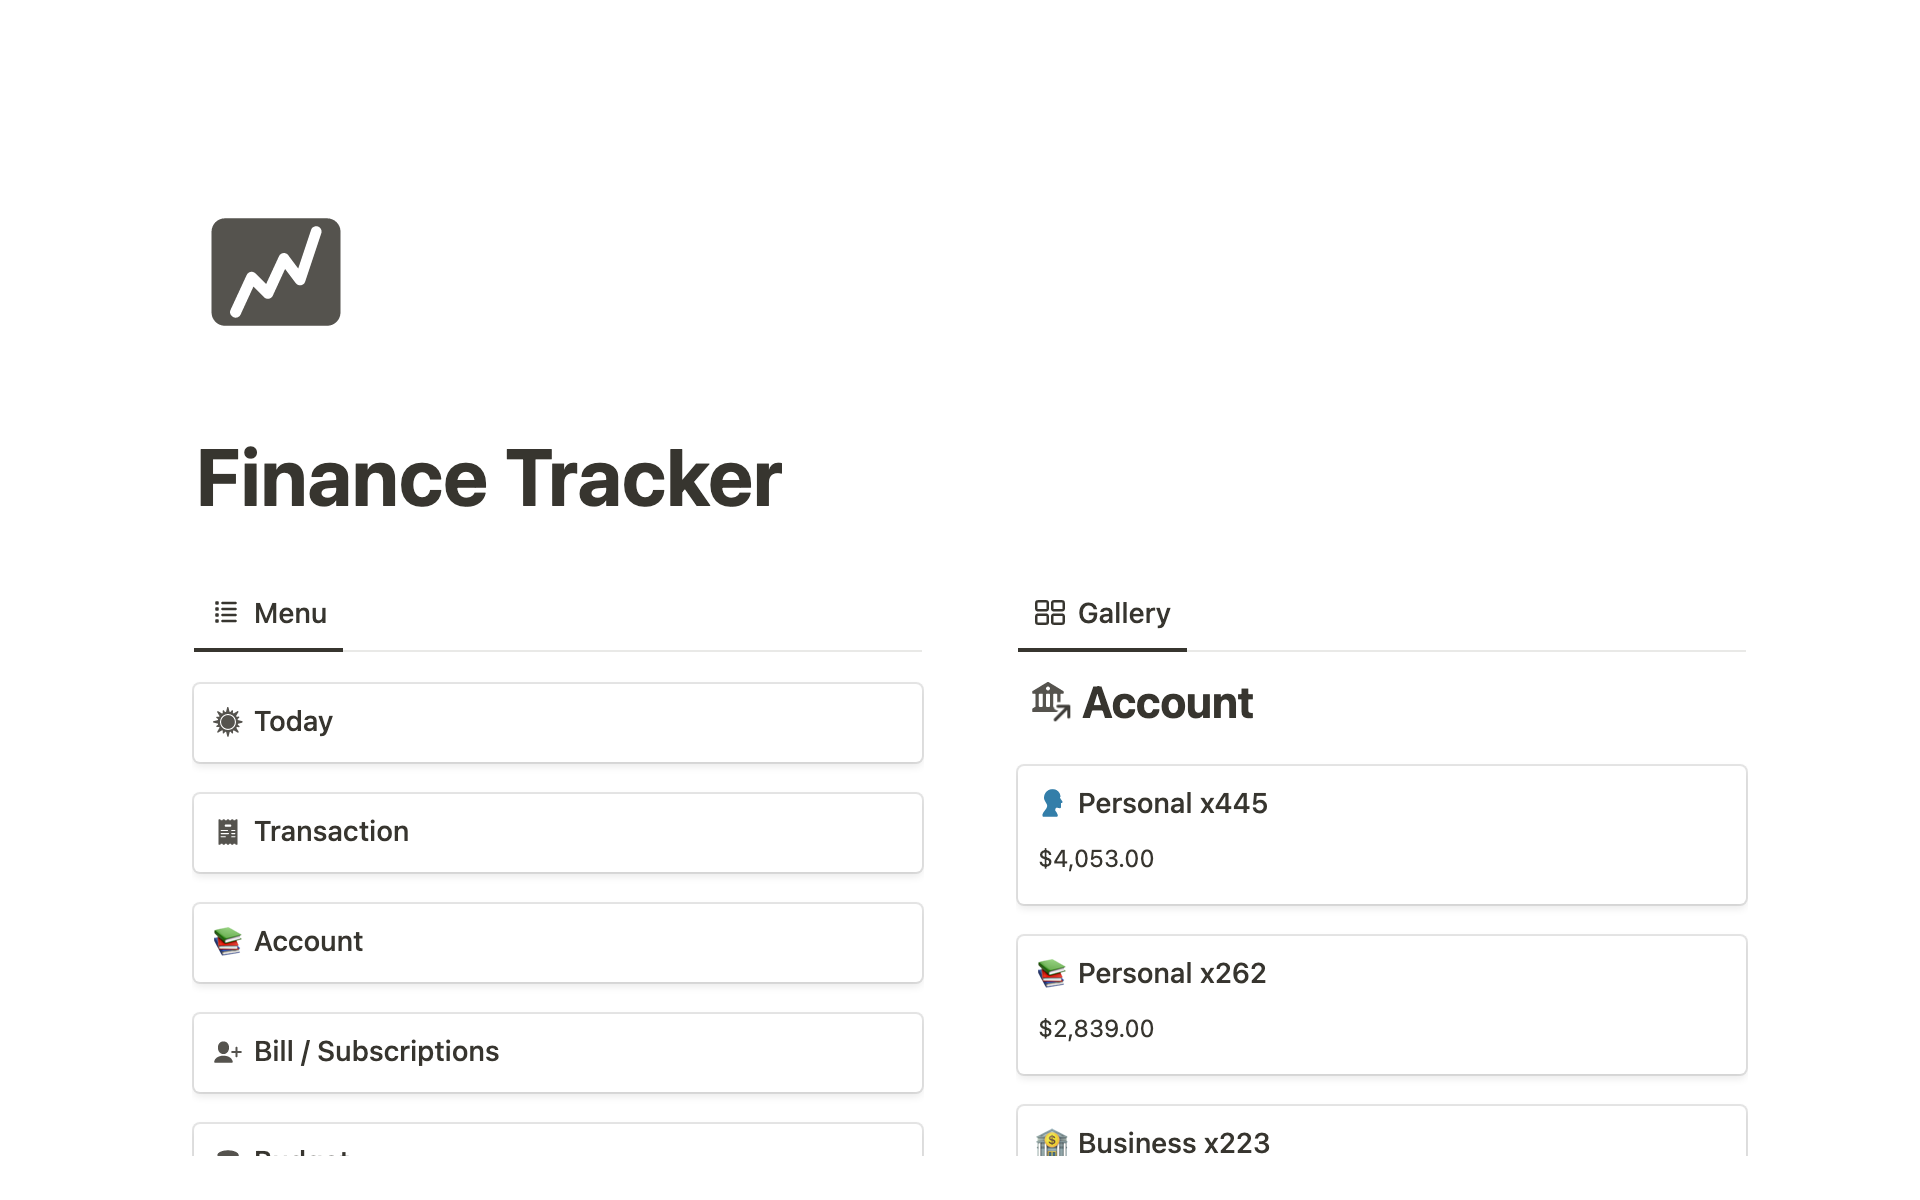 Take charge of your finances and achieve your goals with ease using our Notion finance tracker. Keep track of expenses, accounts, and budget, all in one place.